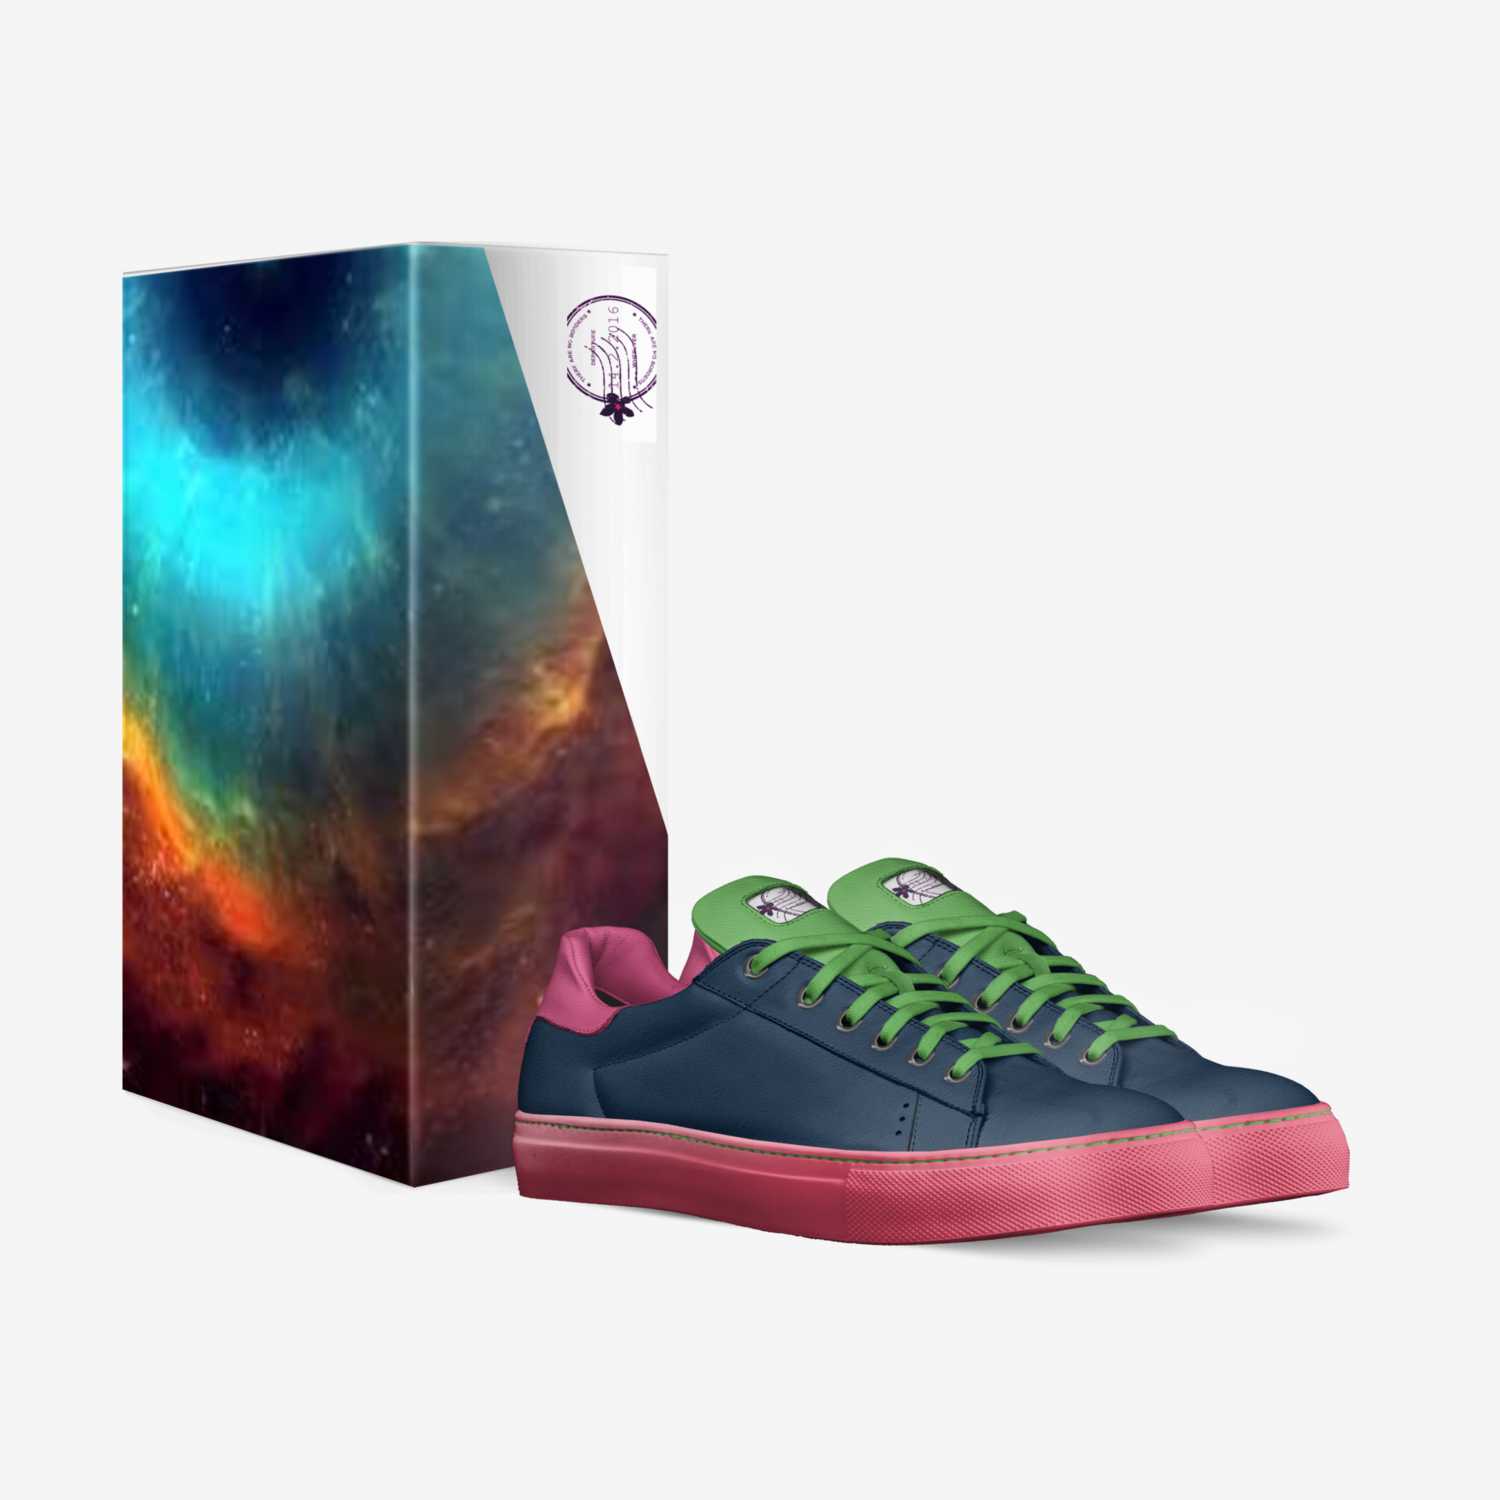 nebula custom made in Italy shoes by Austin Freeman | Box view